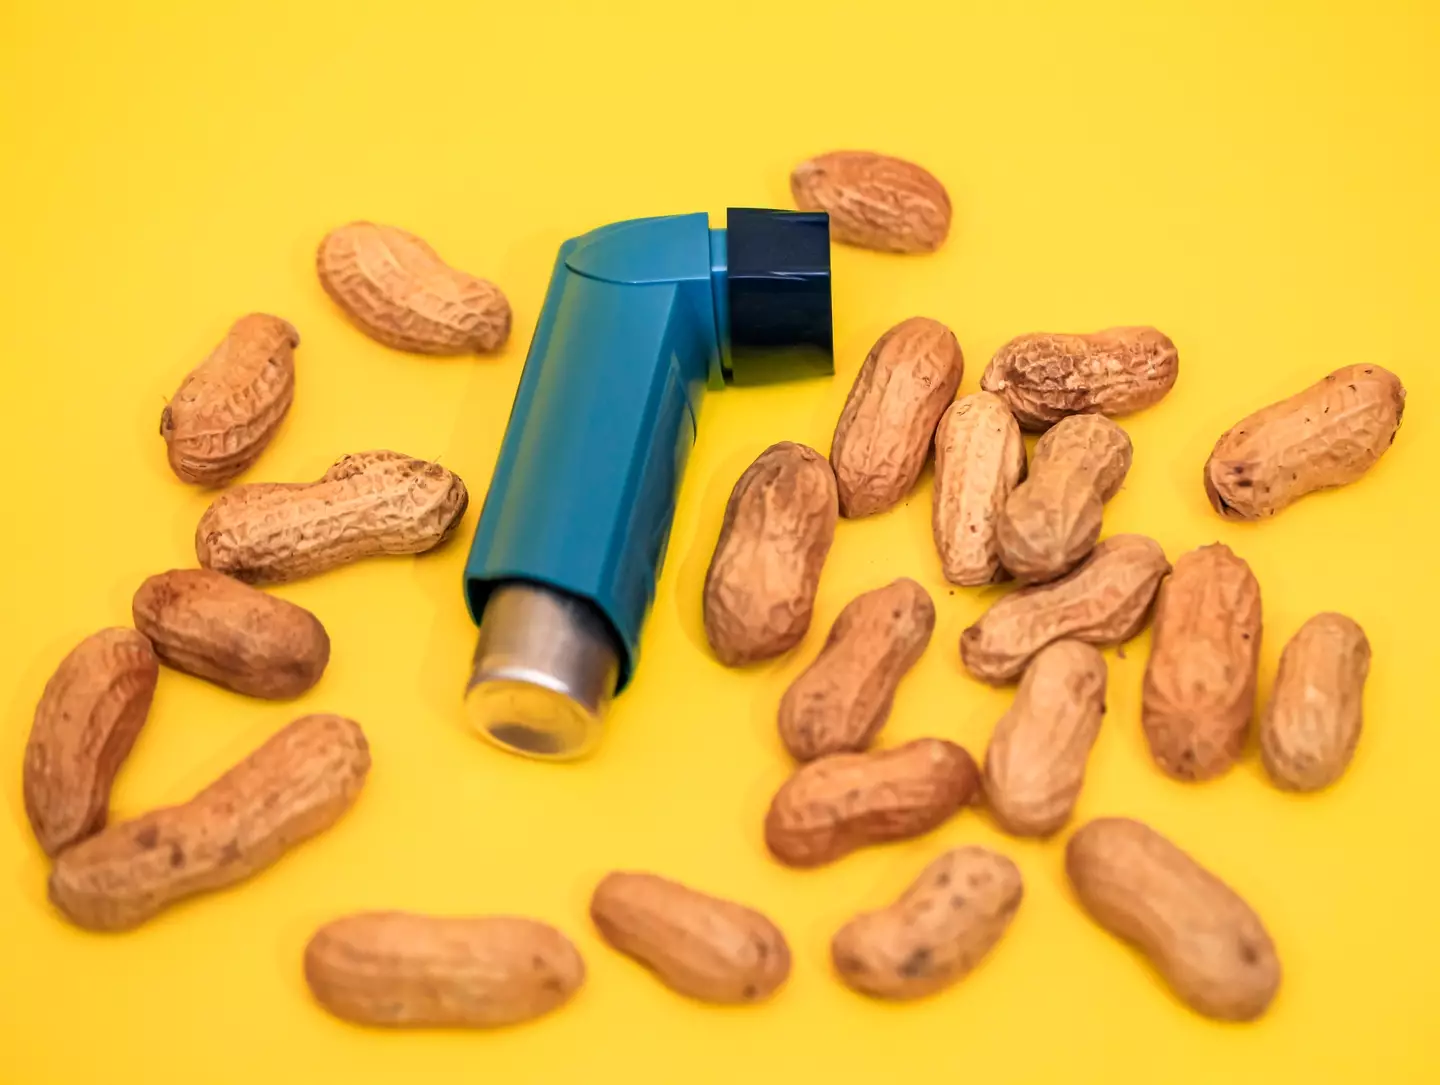 Peanut allergies can be incredibly serious.